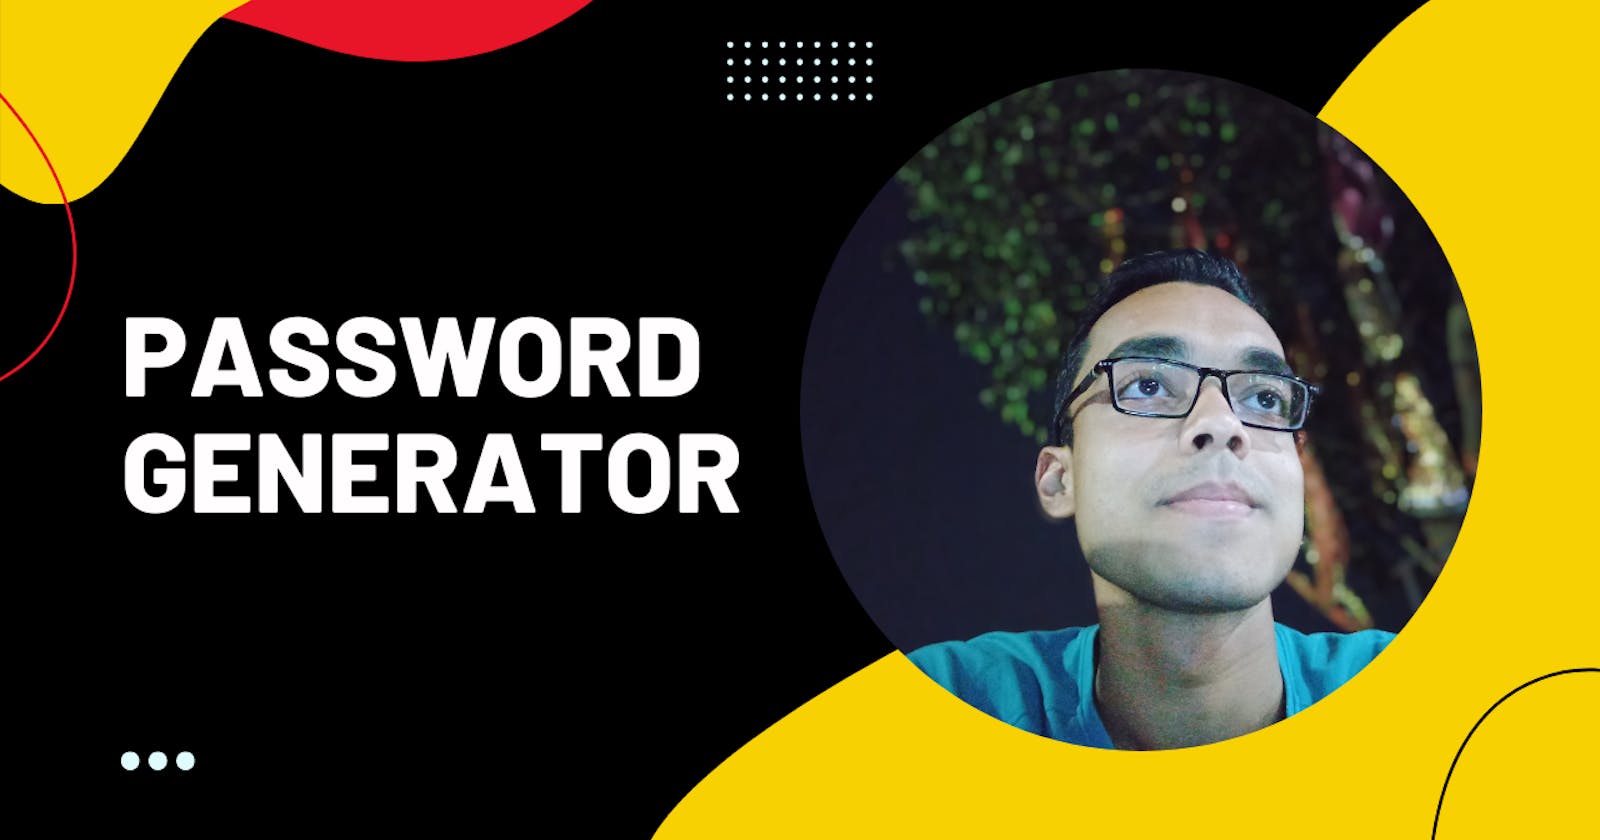 Thought Process Behind Making a React App - Password Generator